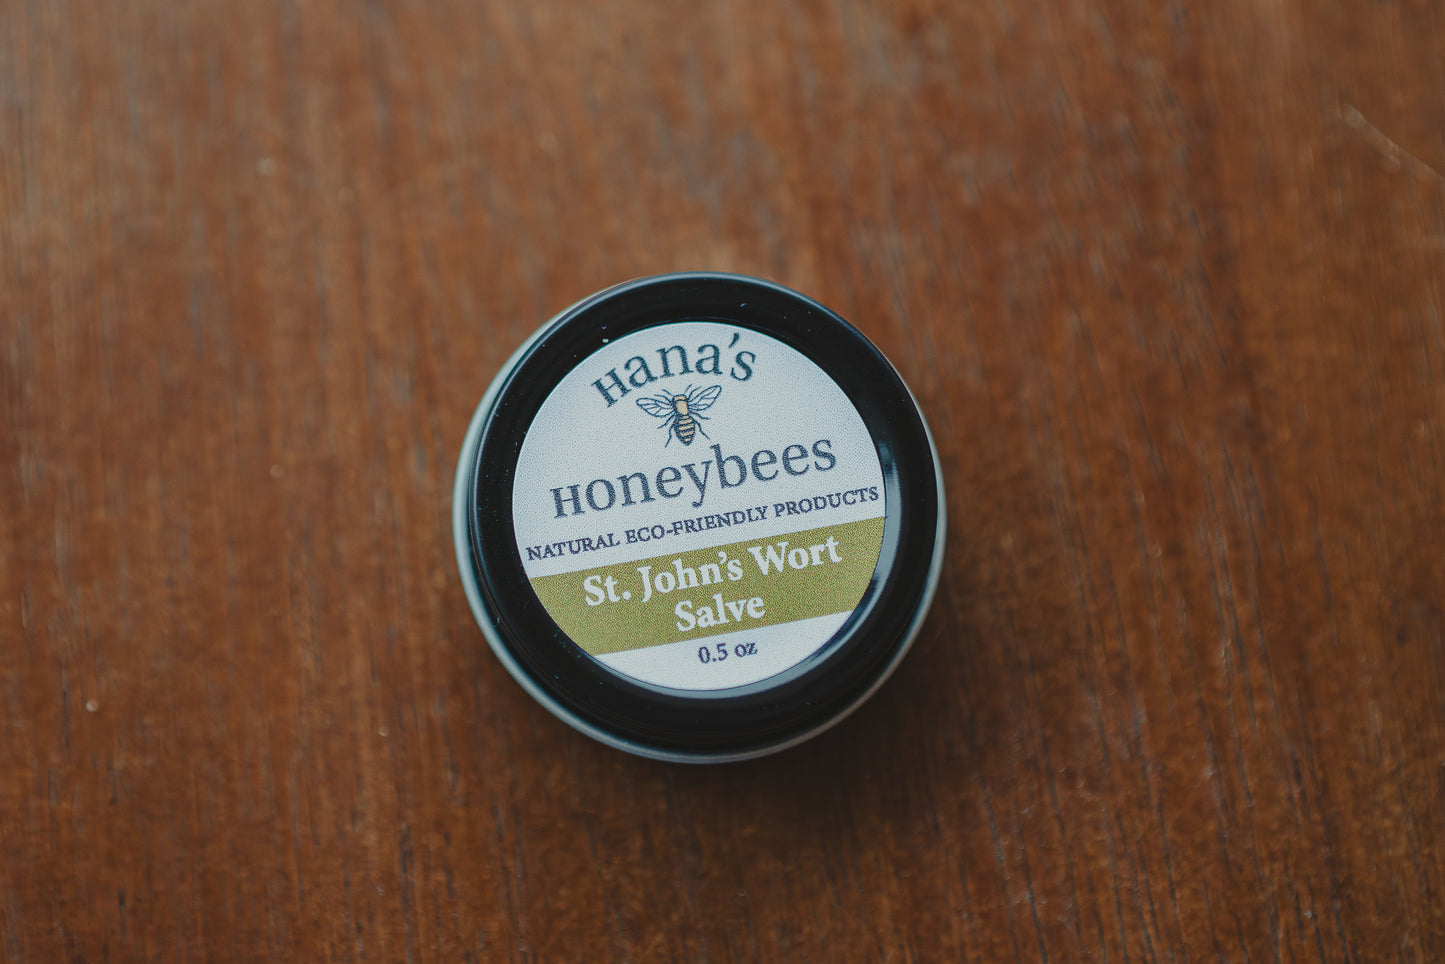 Organic St. John's Wort Salve - Unscented - St. John's Wort Balm 0.5 oz. - Beeswax and Vitamin E Oil - Eco-friendly - All Natural